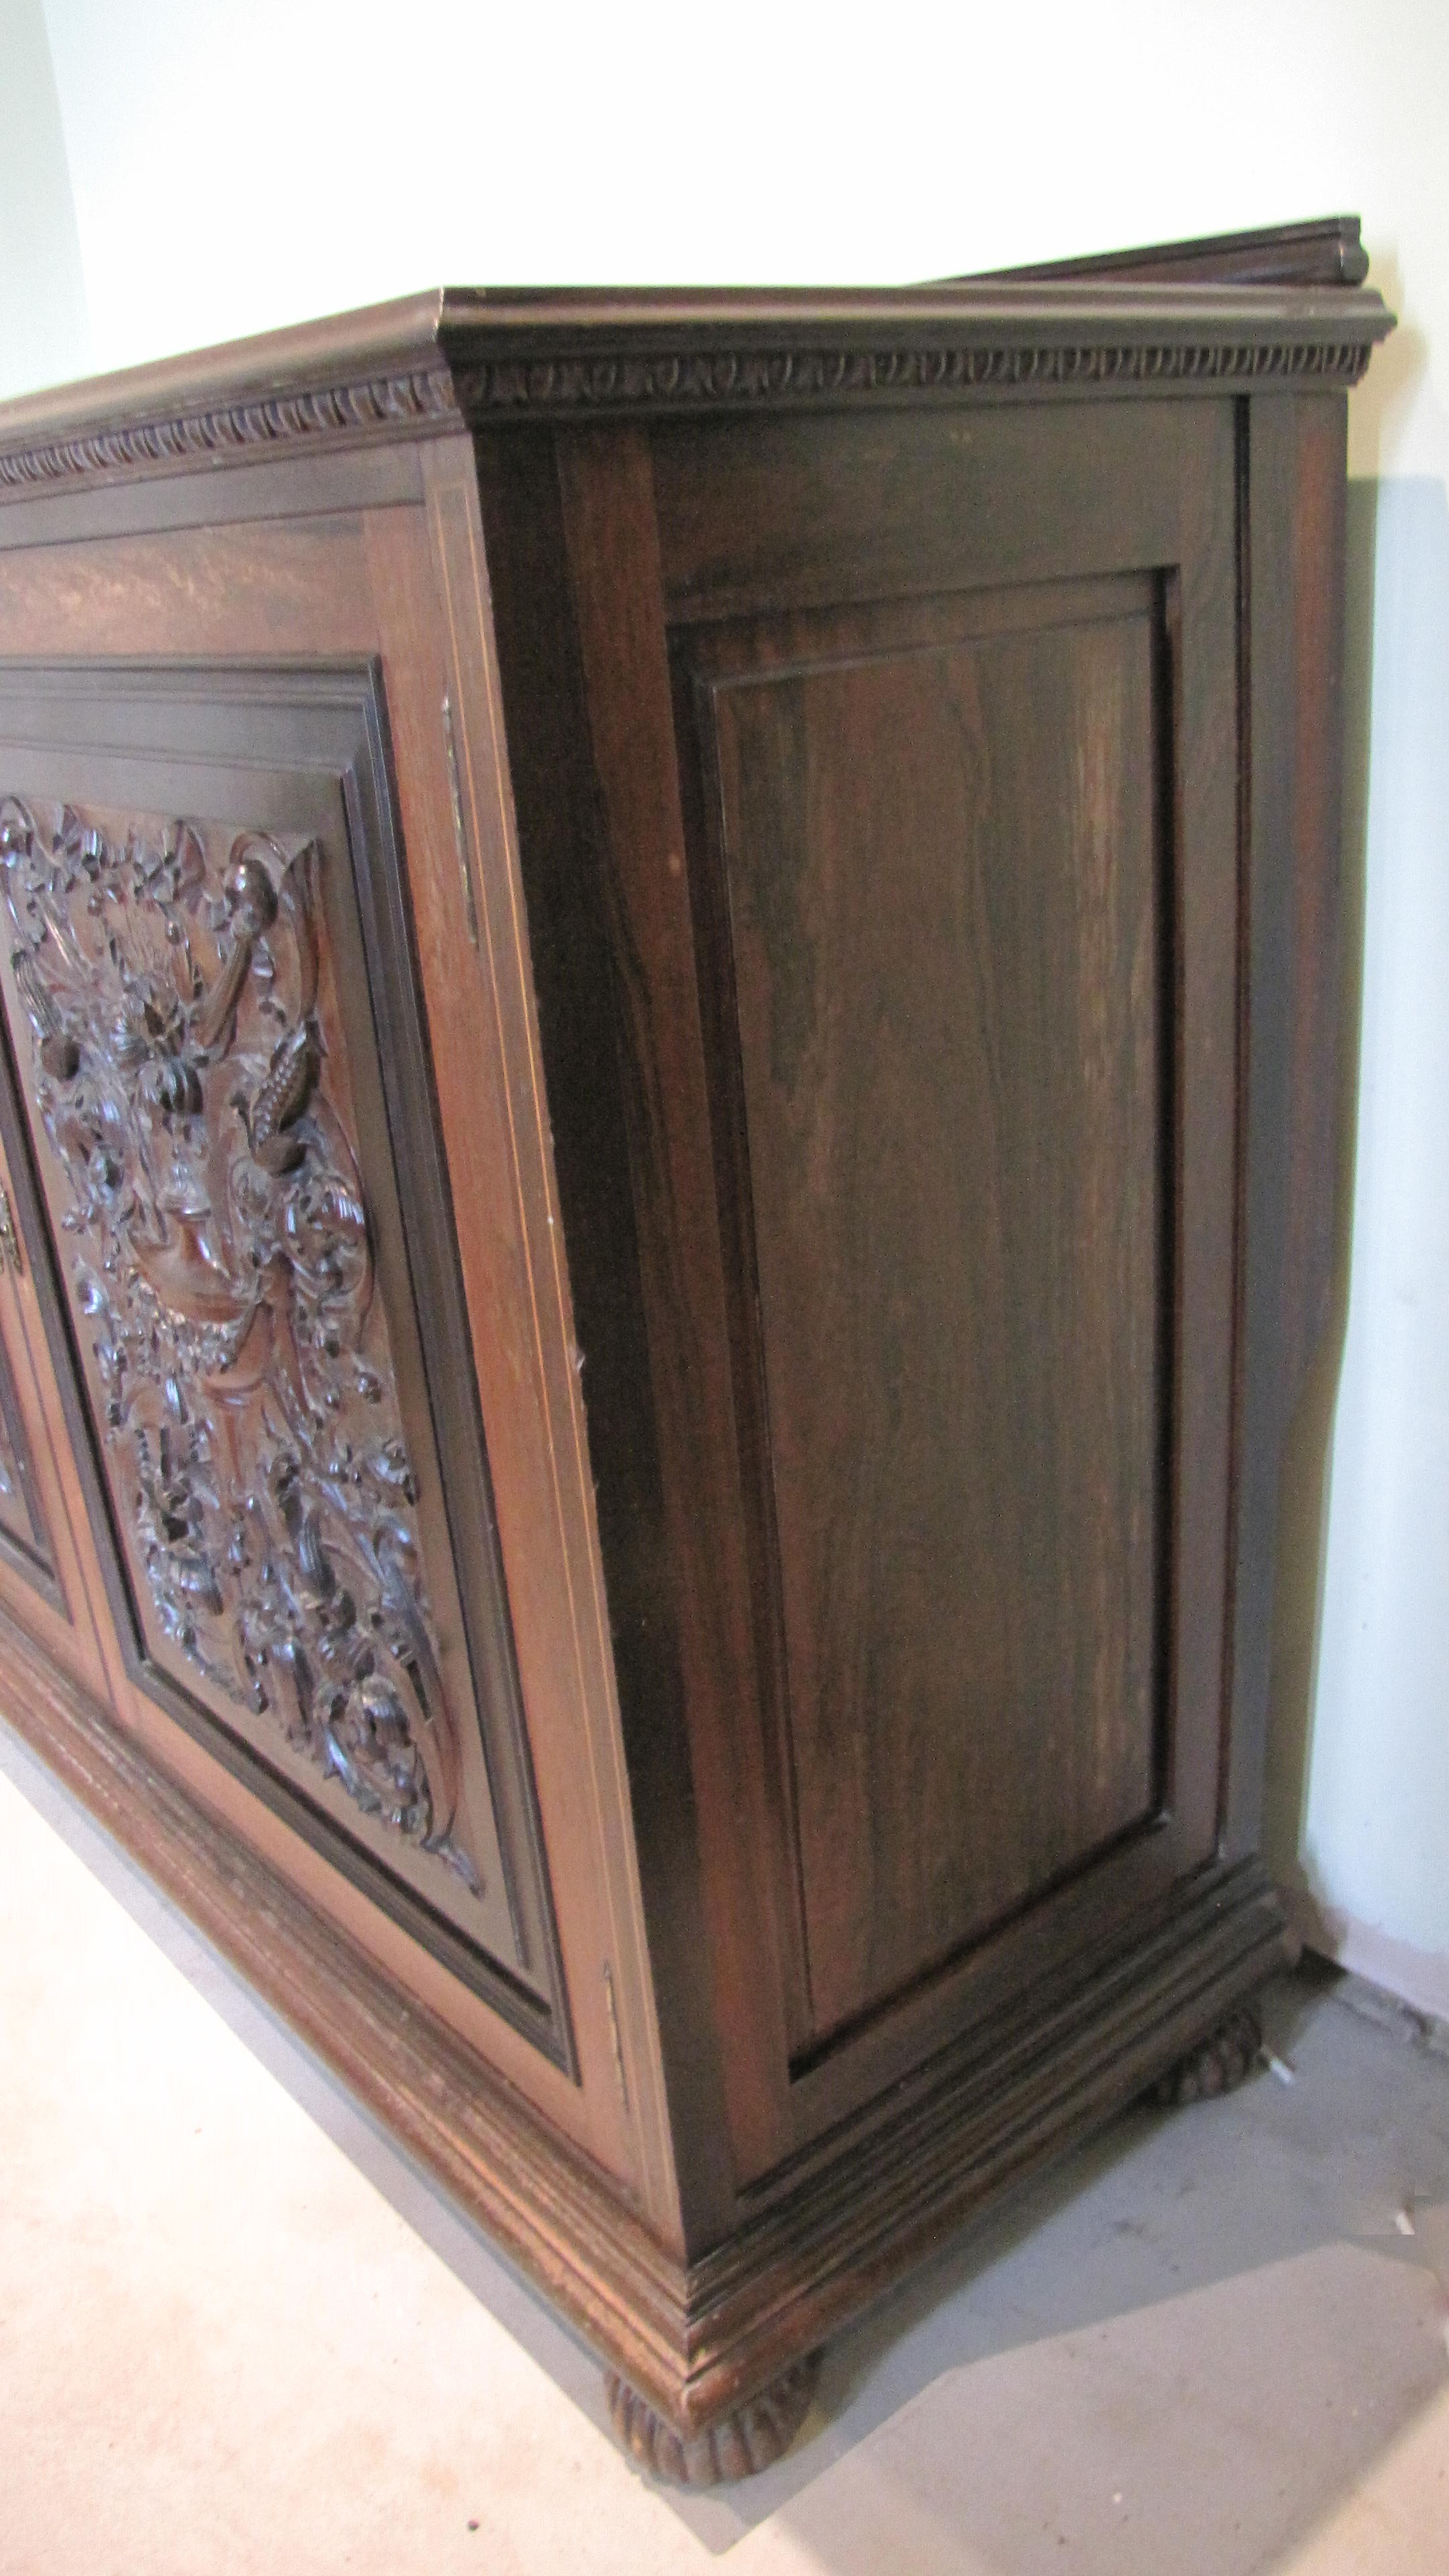 19th Century Rosewood Cabinet - Image 4 of 7